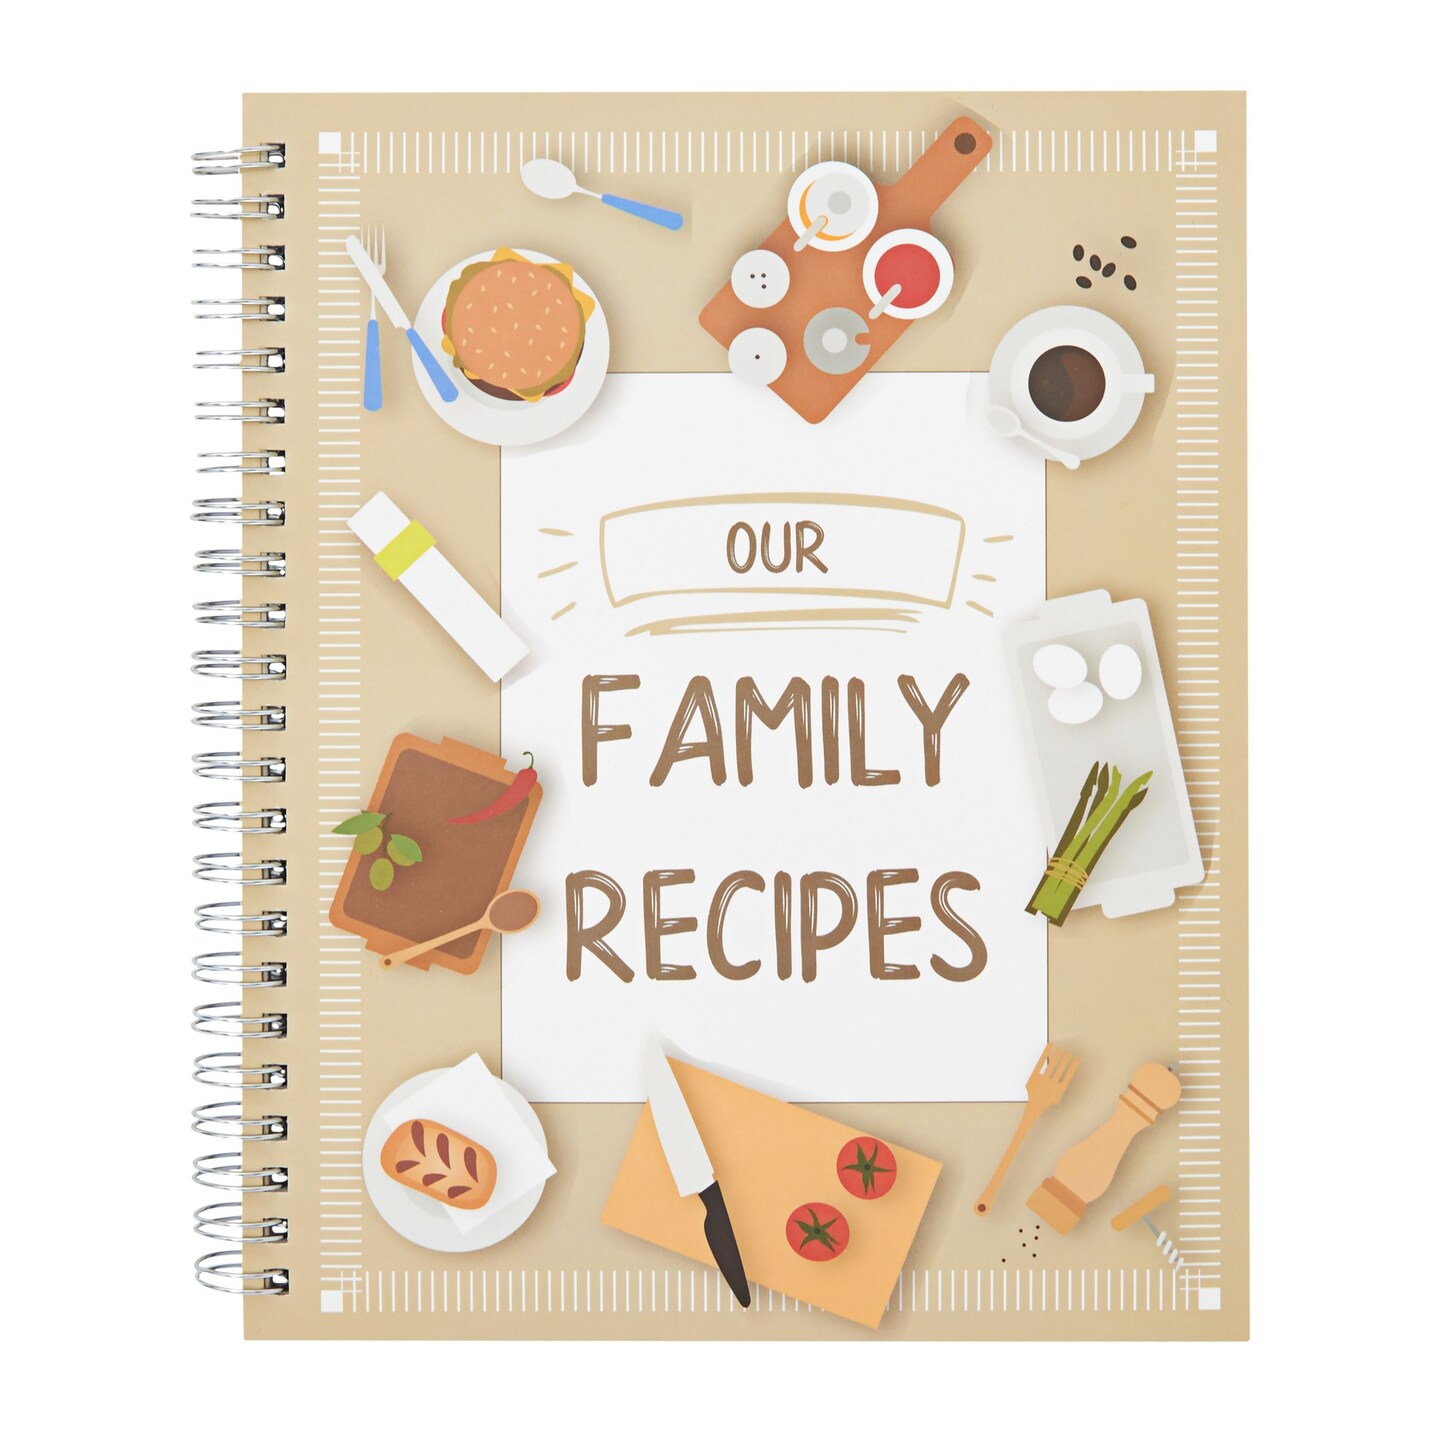 Blank Family Recipe Book to Write In, Spiral Bound DIY Make Your